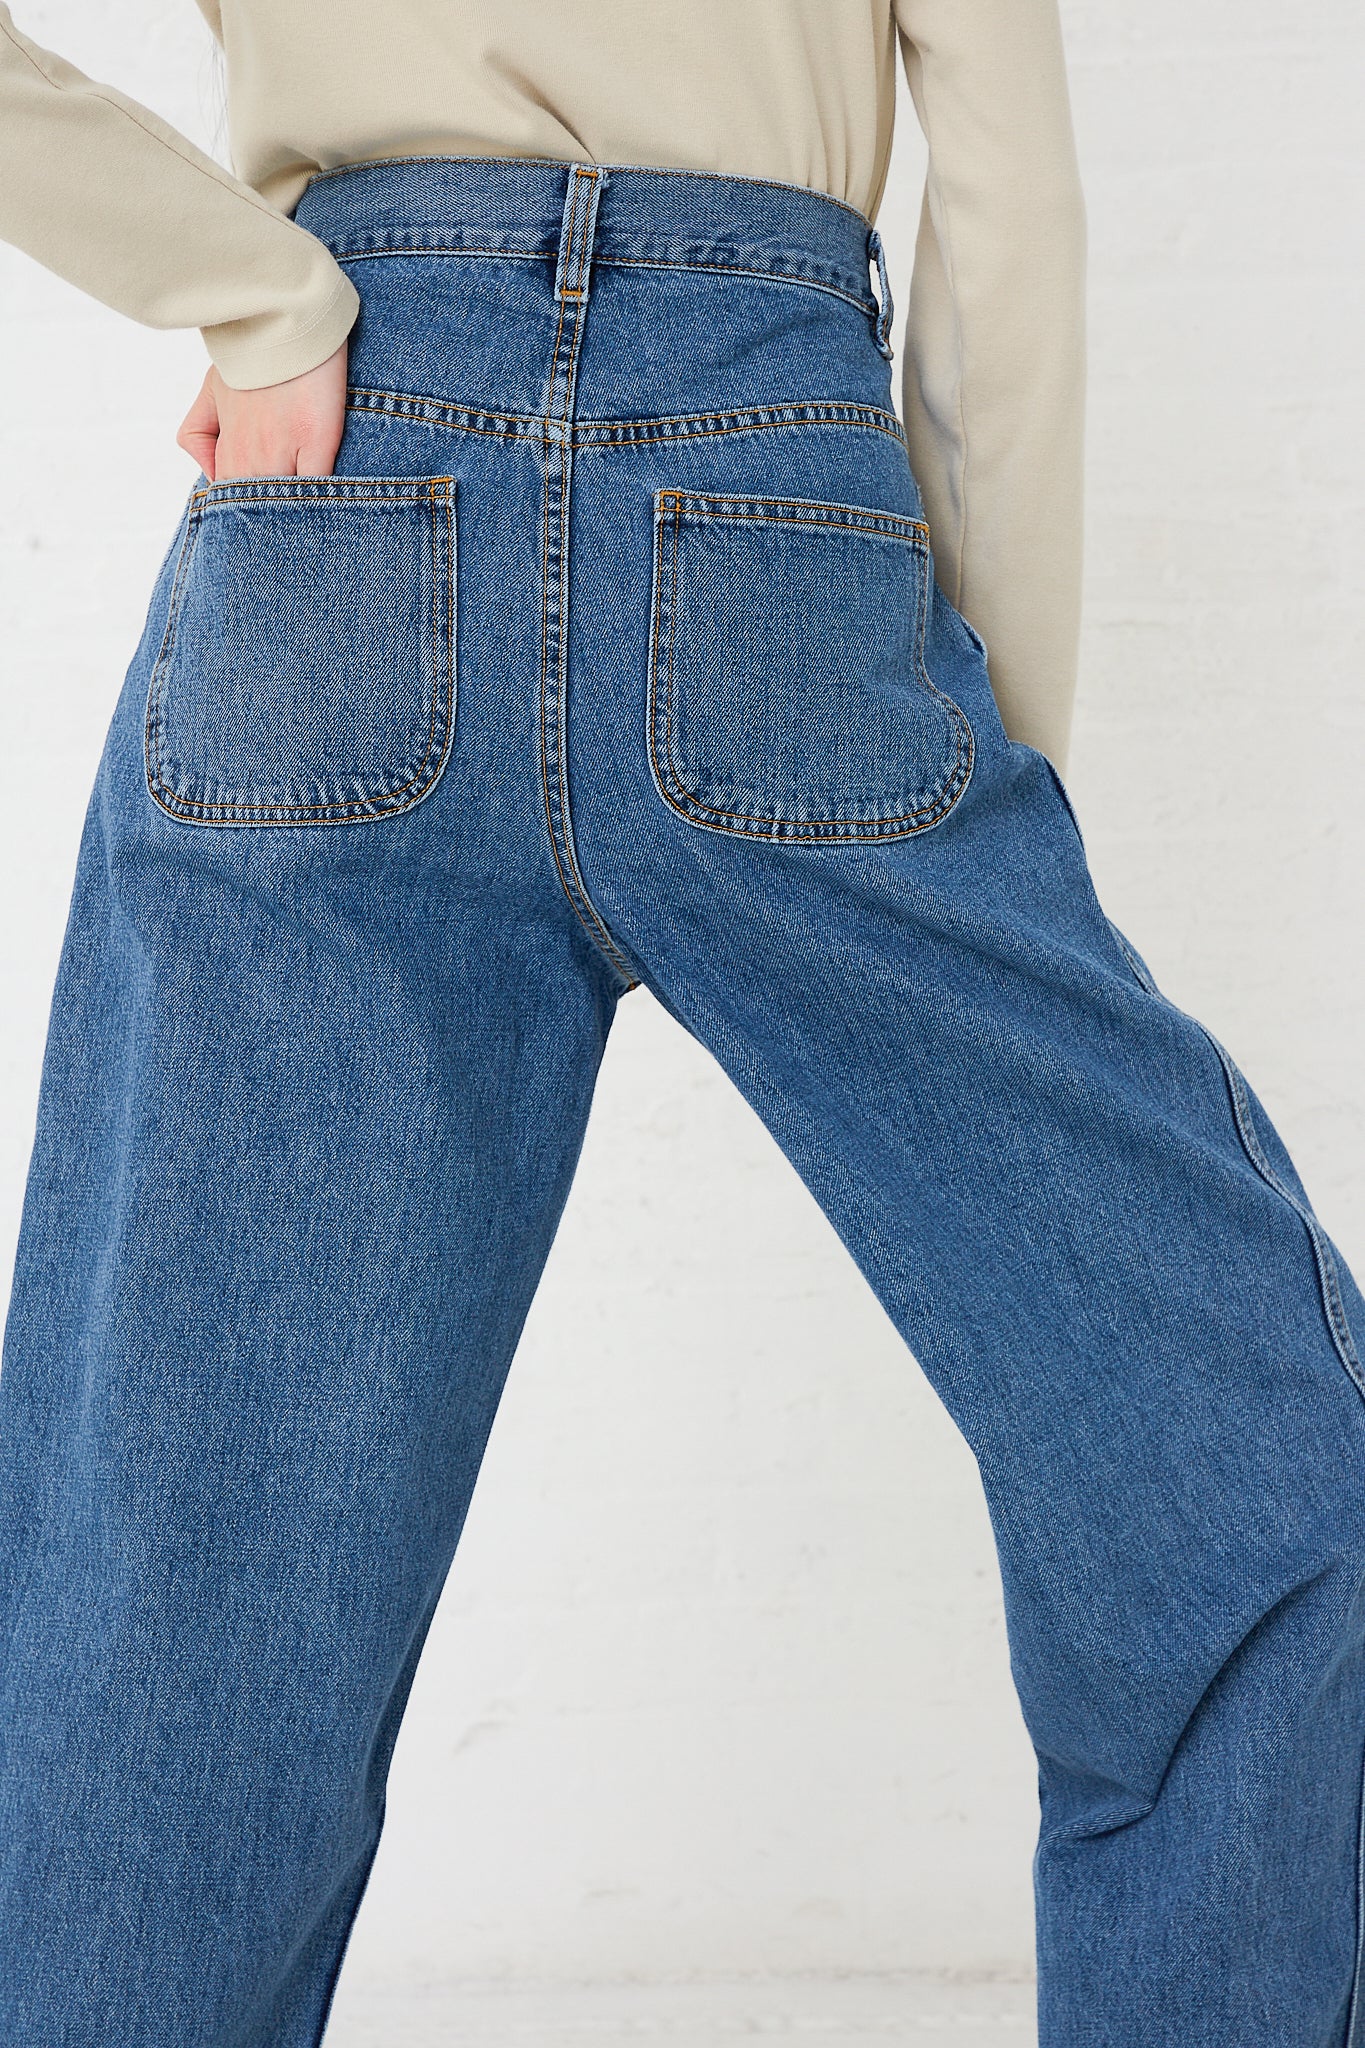 A woman effortlessly rocks a pair of high waisted jeans crafted from premium Japanese denim (Japanese Denim California Wide in Cowboy Blue by Jesse Kamm). Available at Oroboro Store.